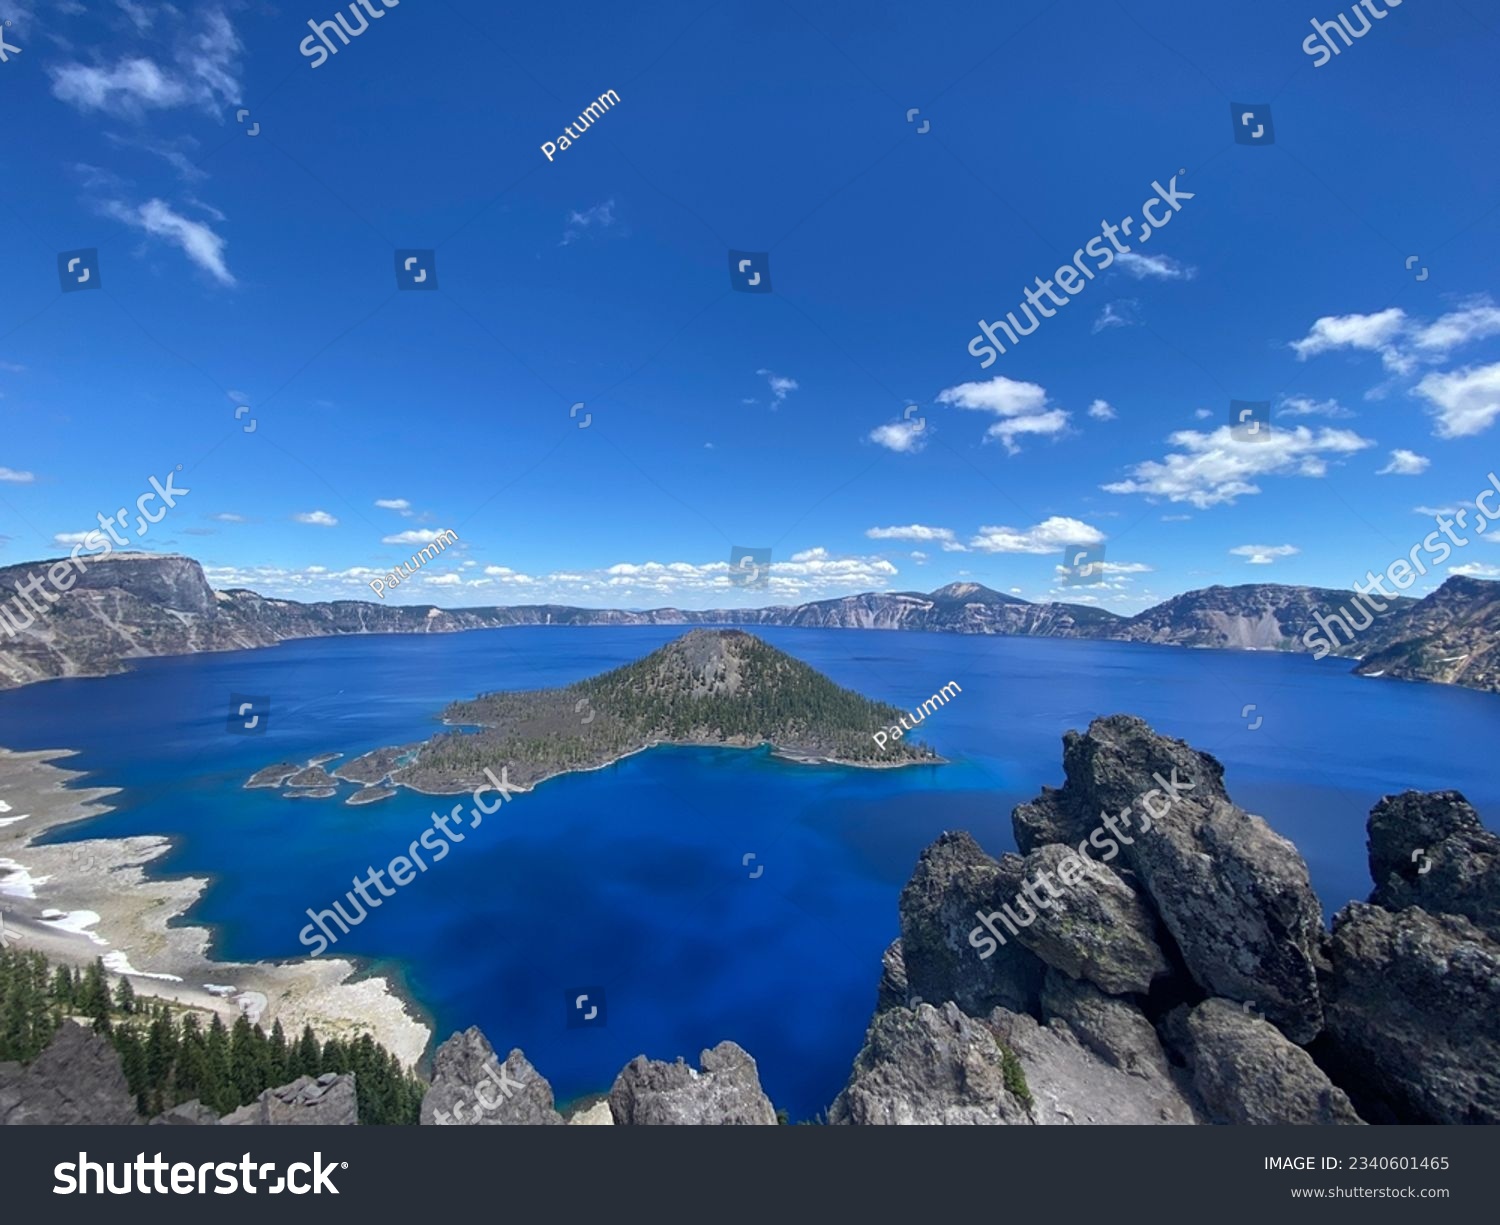 Crater lake, The deepest lake in America #2340601465